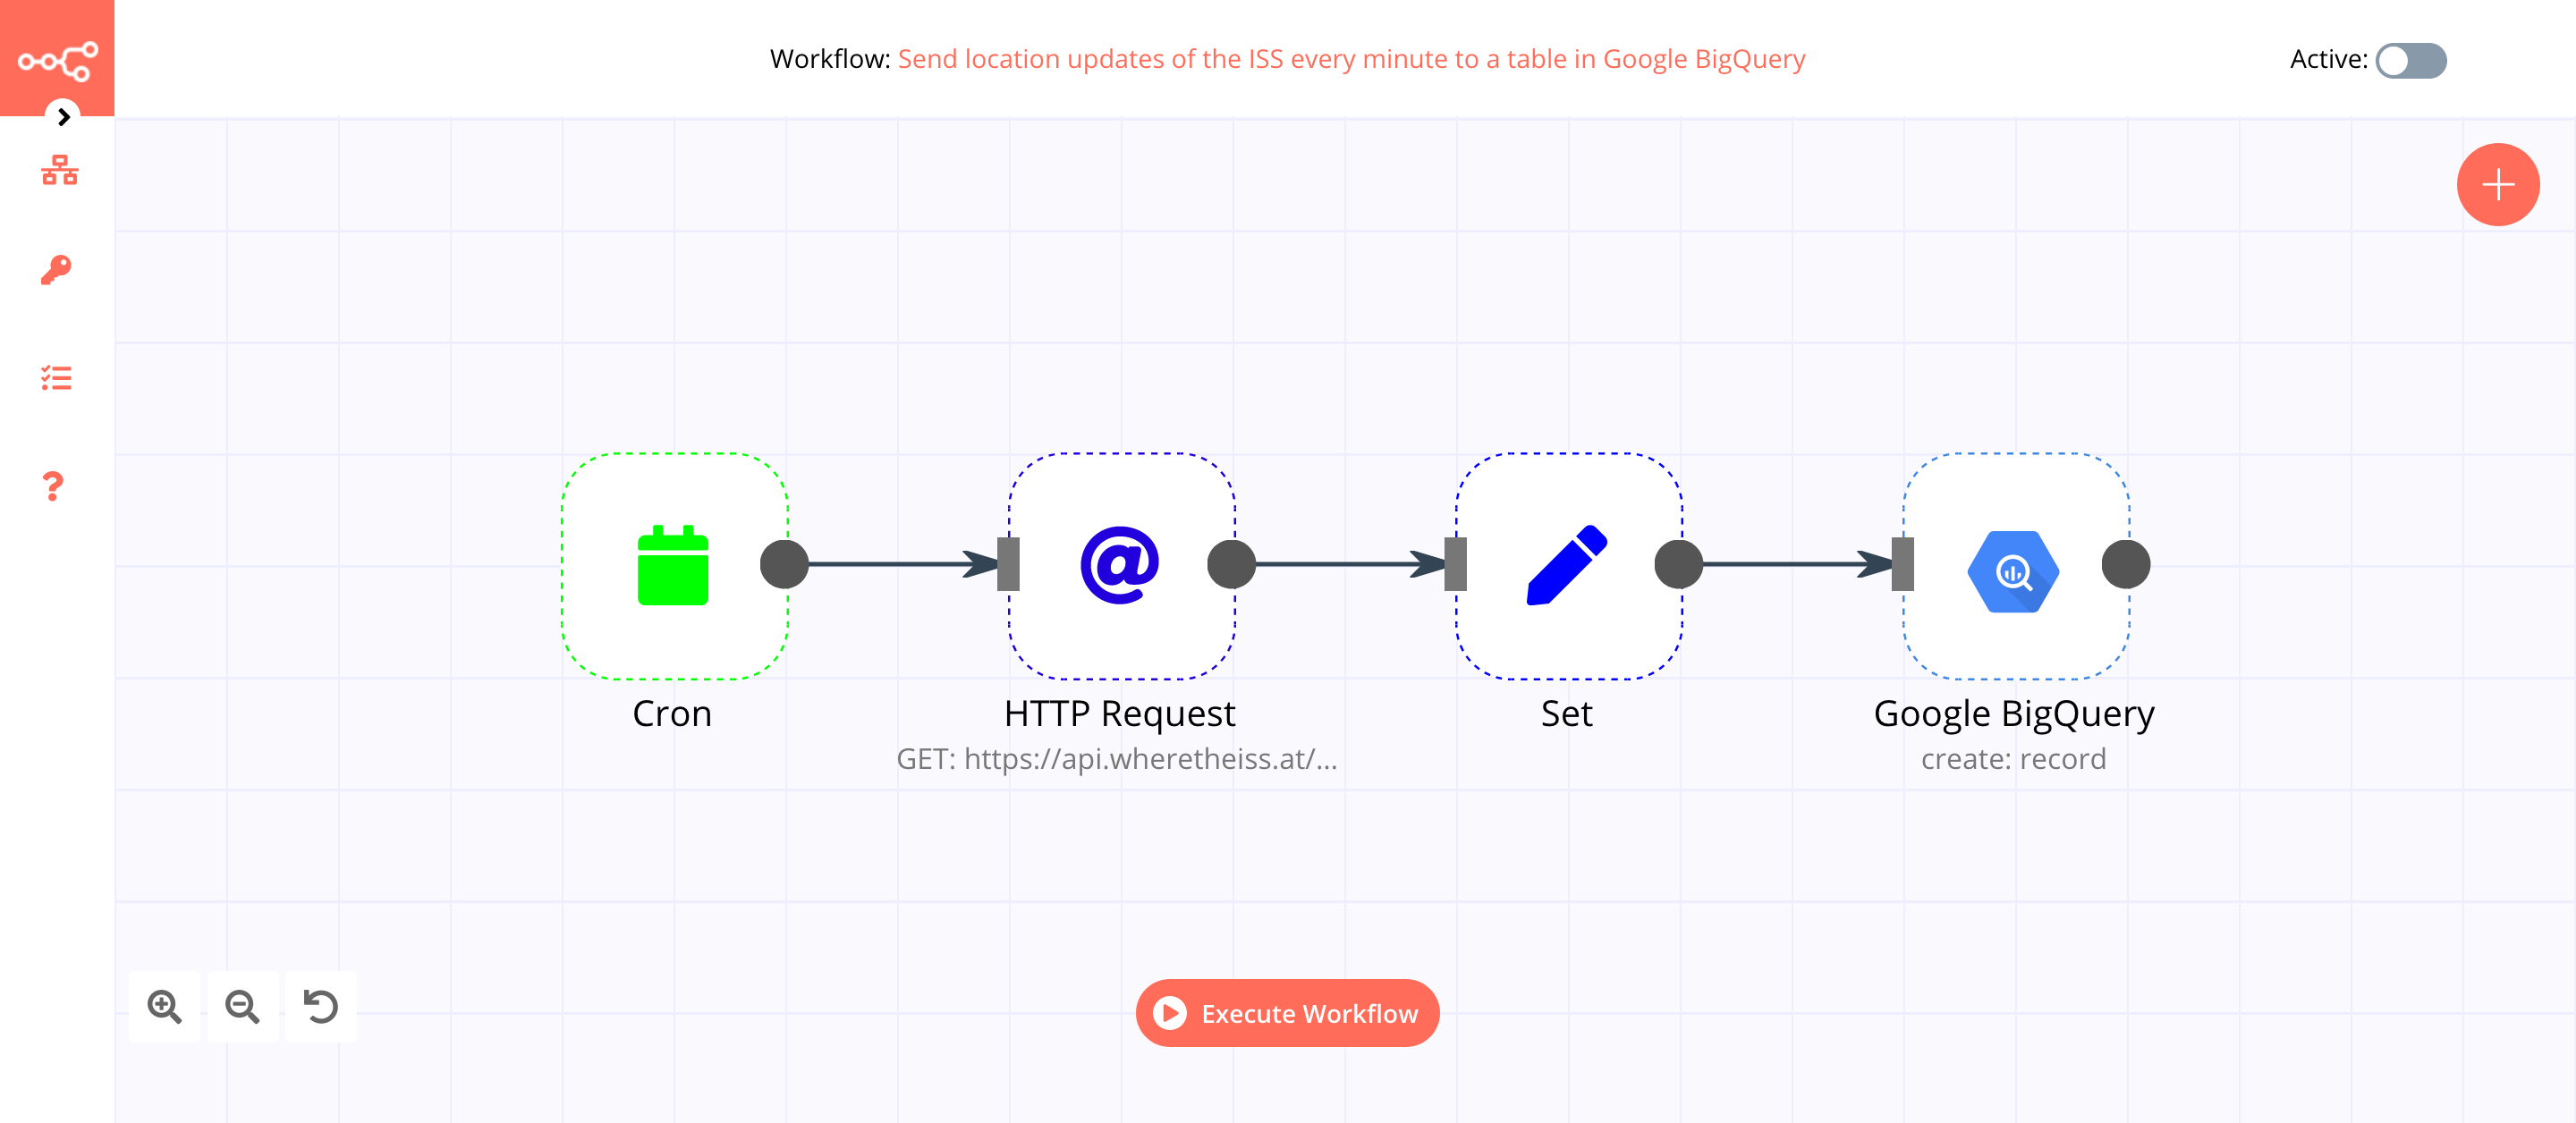 A workflow with the Google BigQuery node